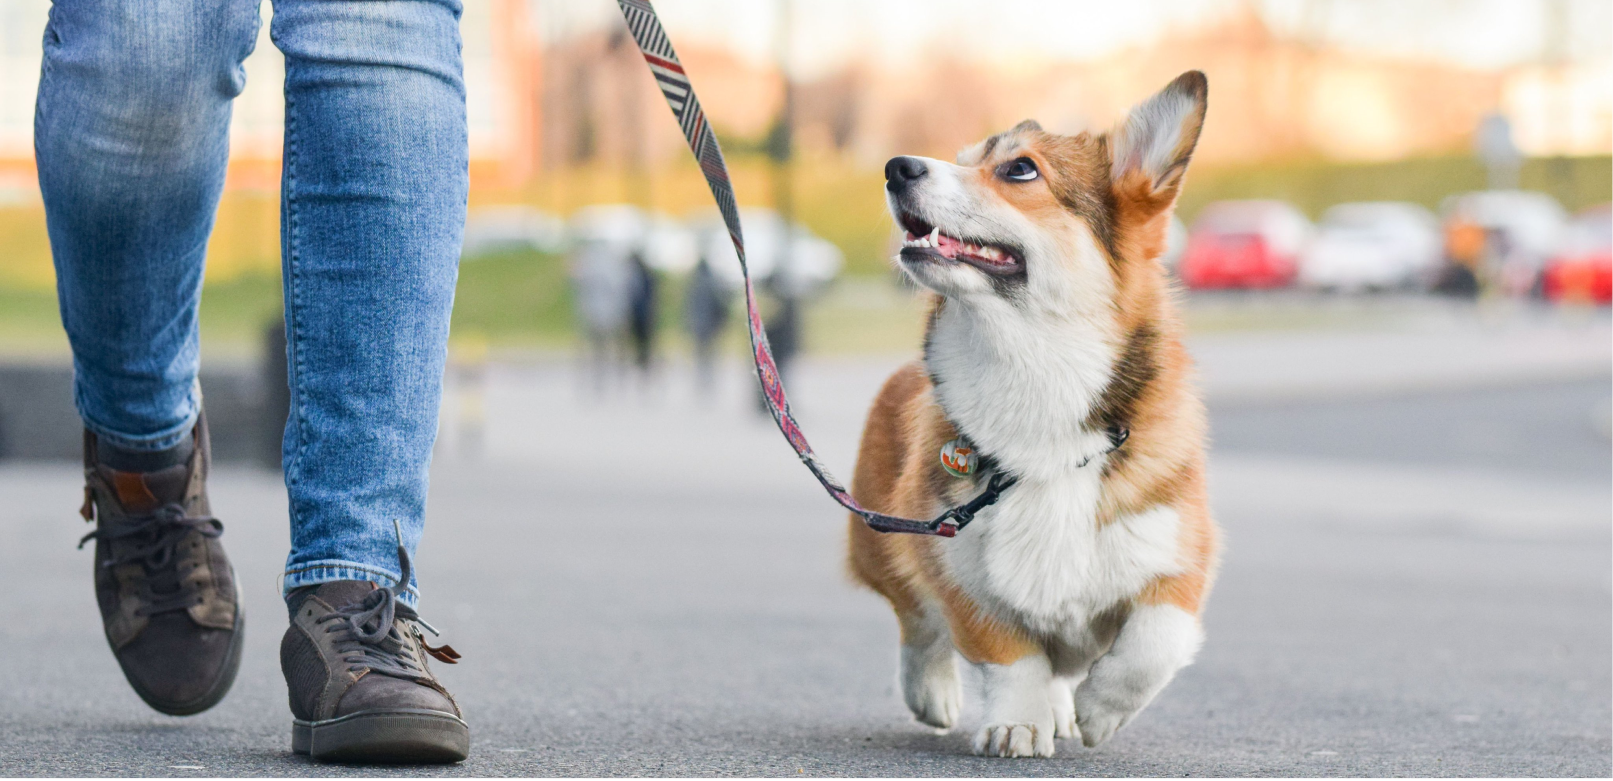 Small Service Dogs: Can Small Dogs Be Service Dogs?